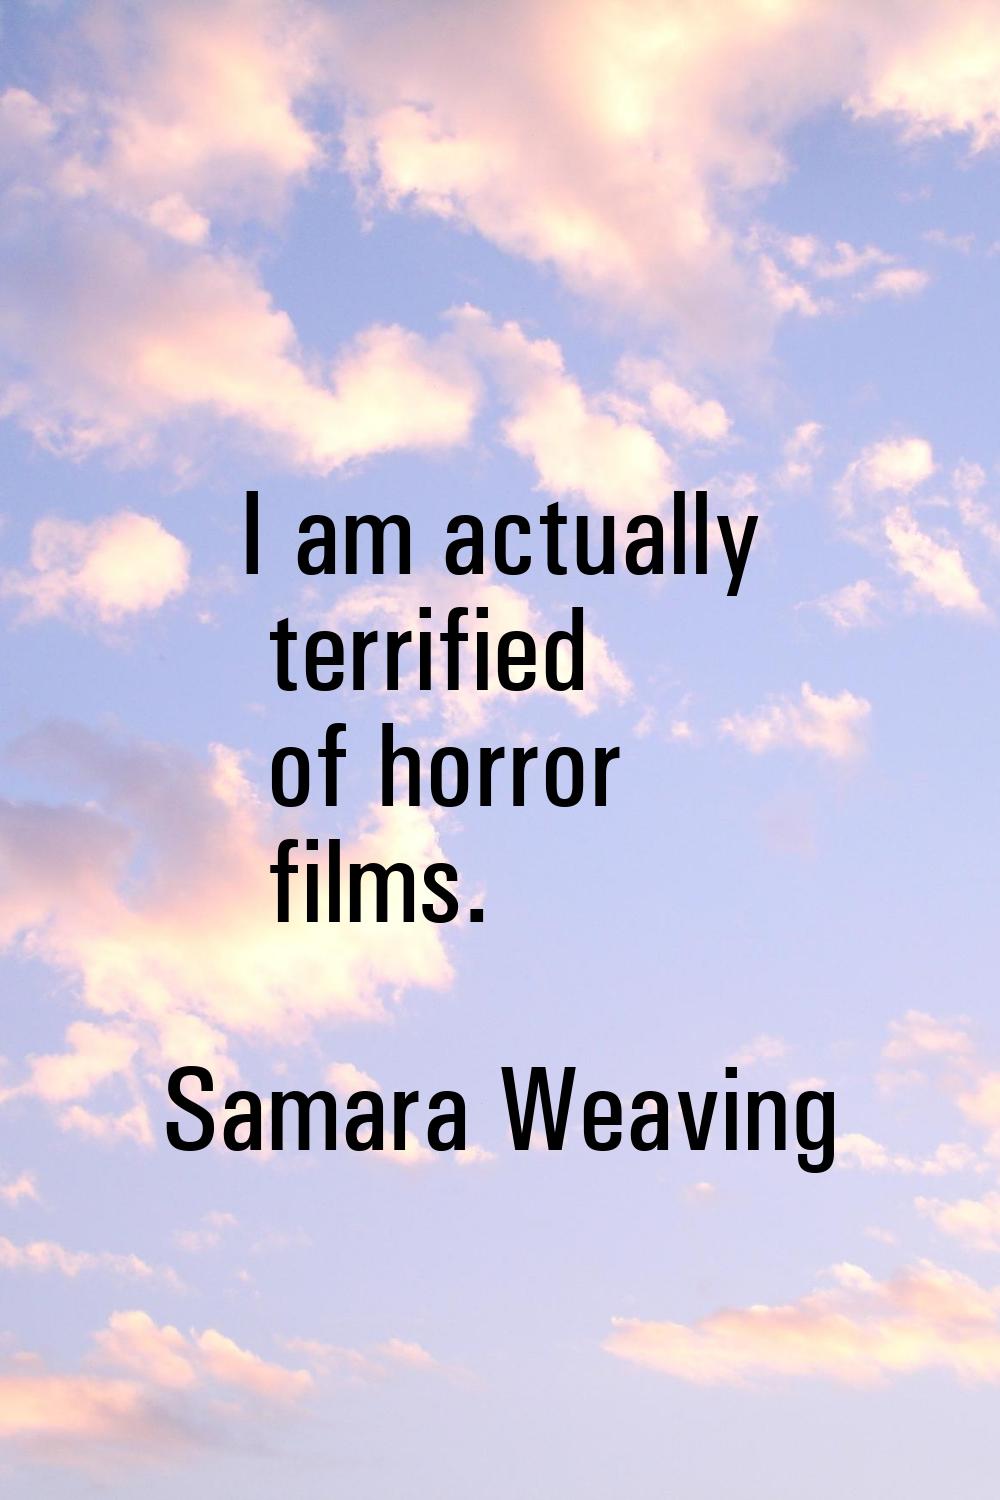 I am actually terrified of horror films.